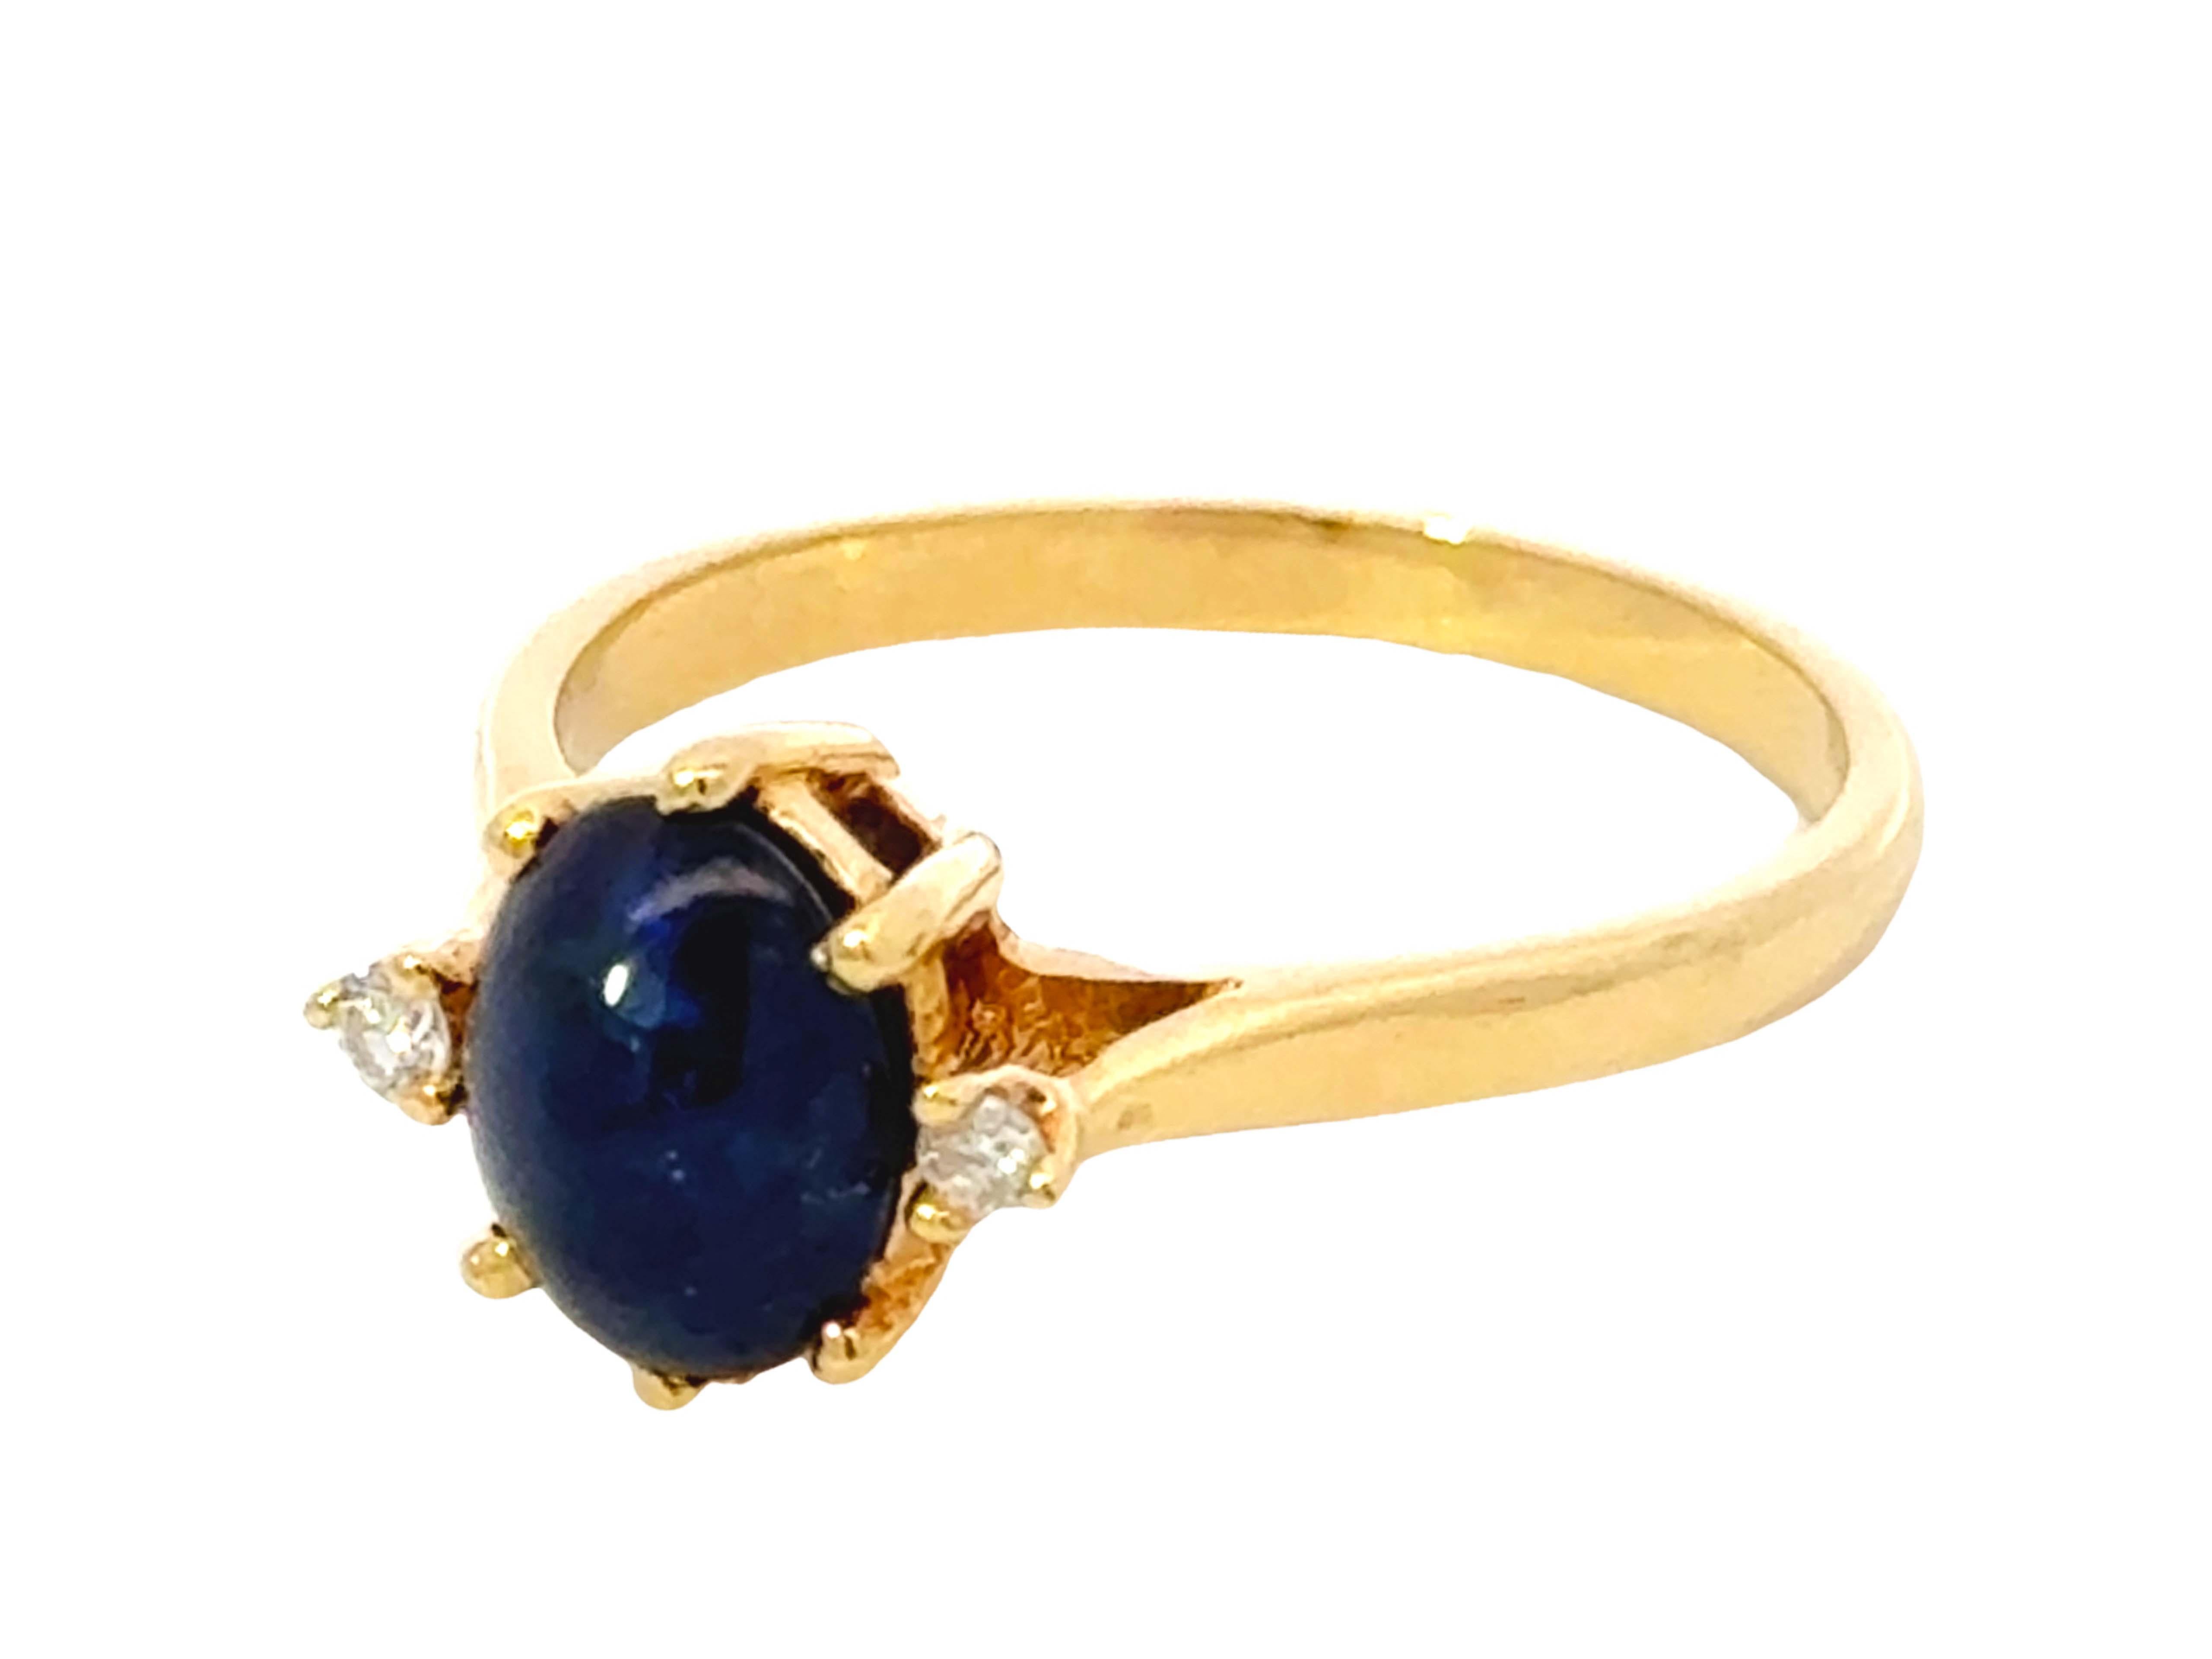 Cabochon Blue Sapphire Diamond Ring 18k Yellow Gold In Excellent Condition For Sale In Honolulu, HI